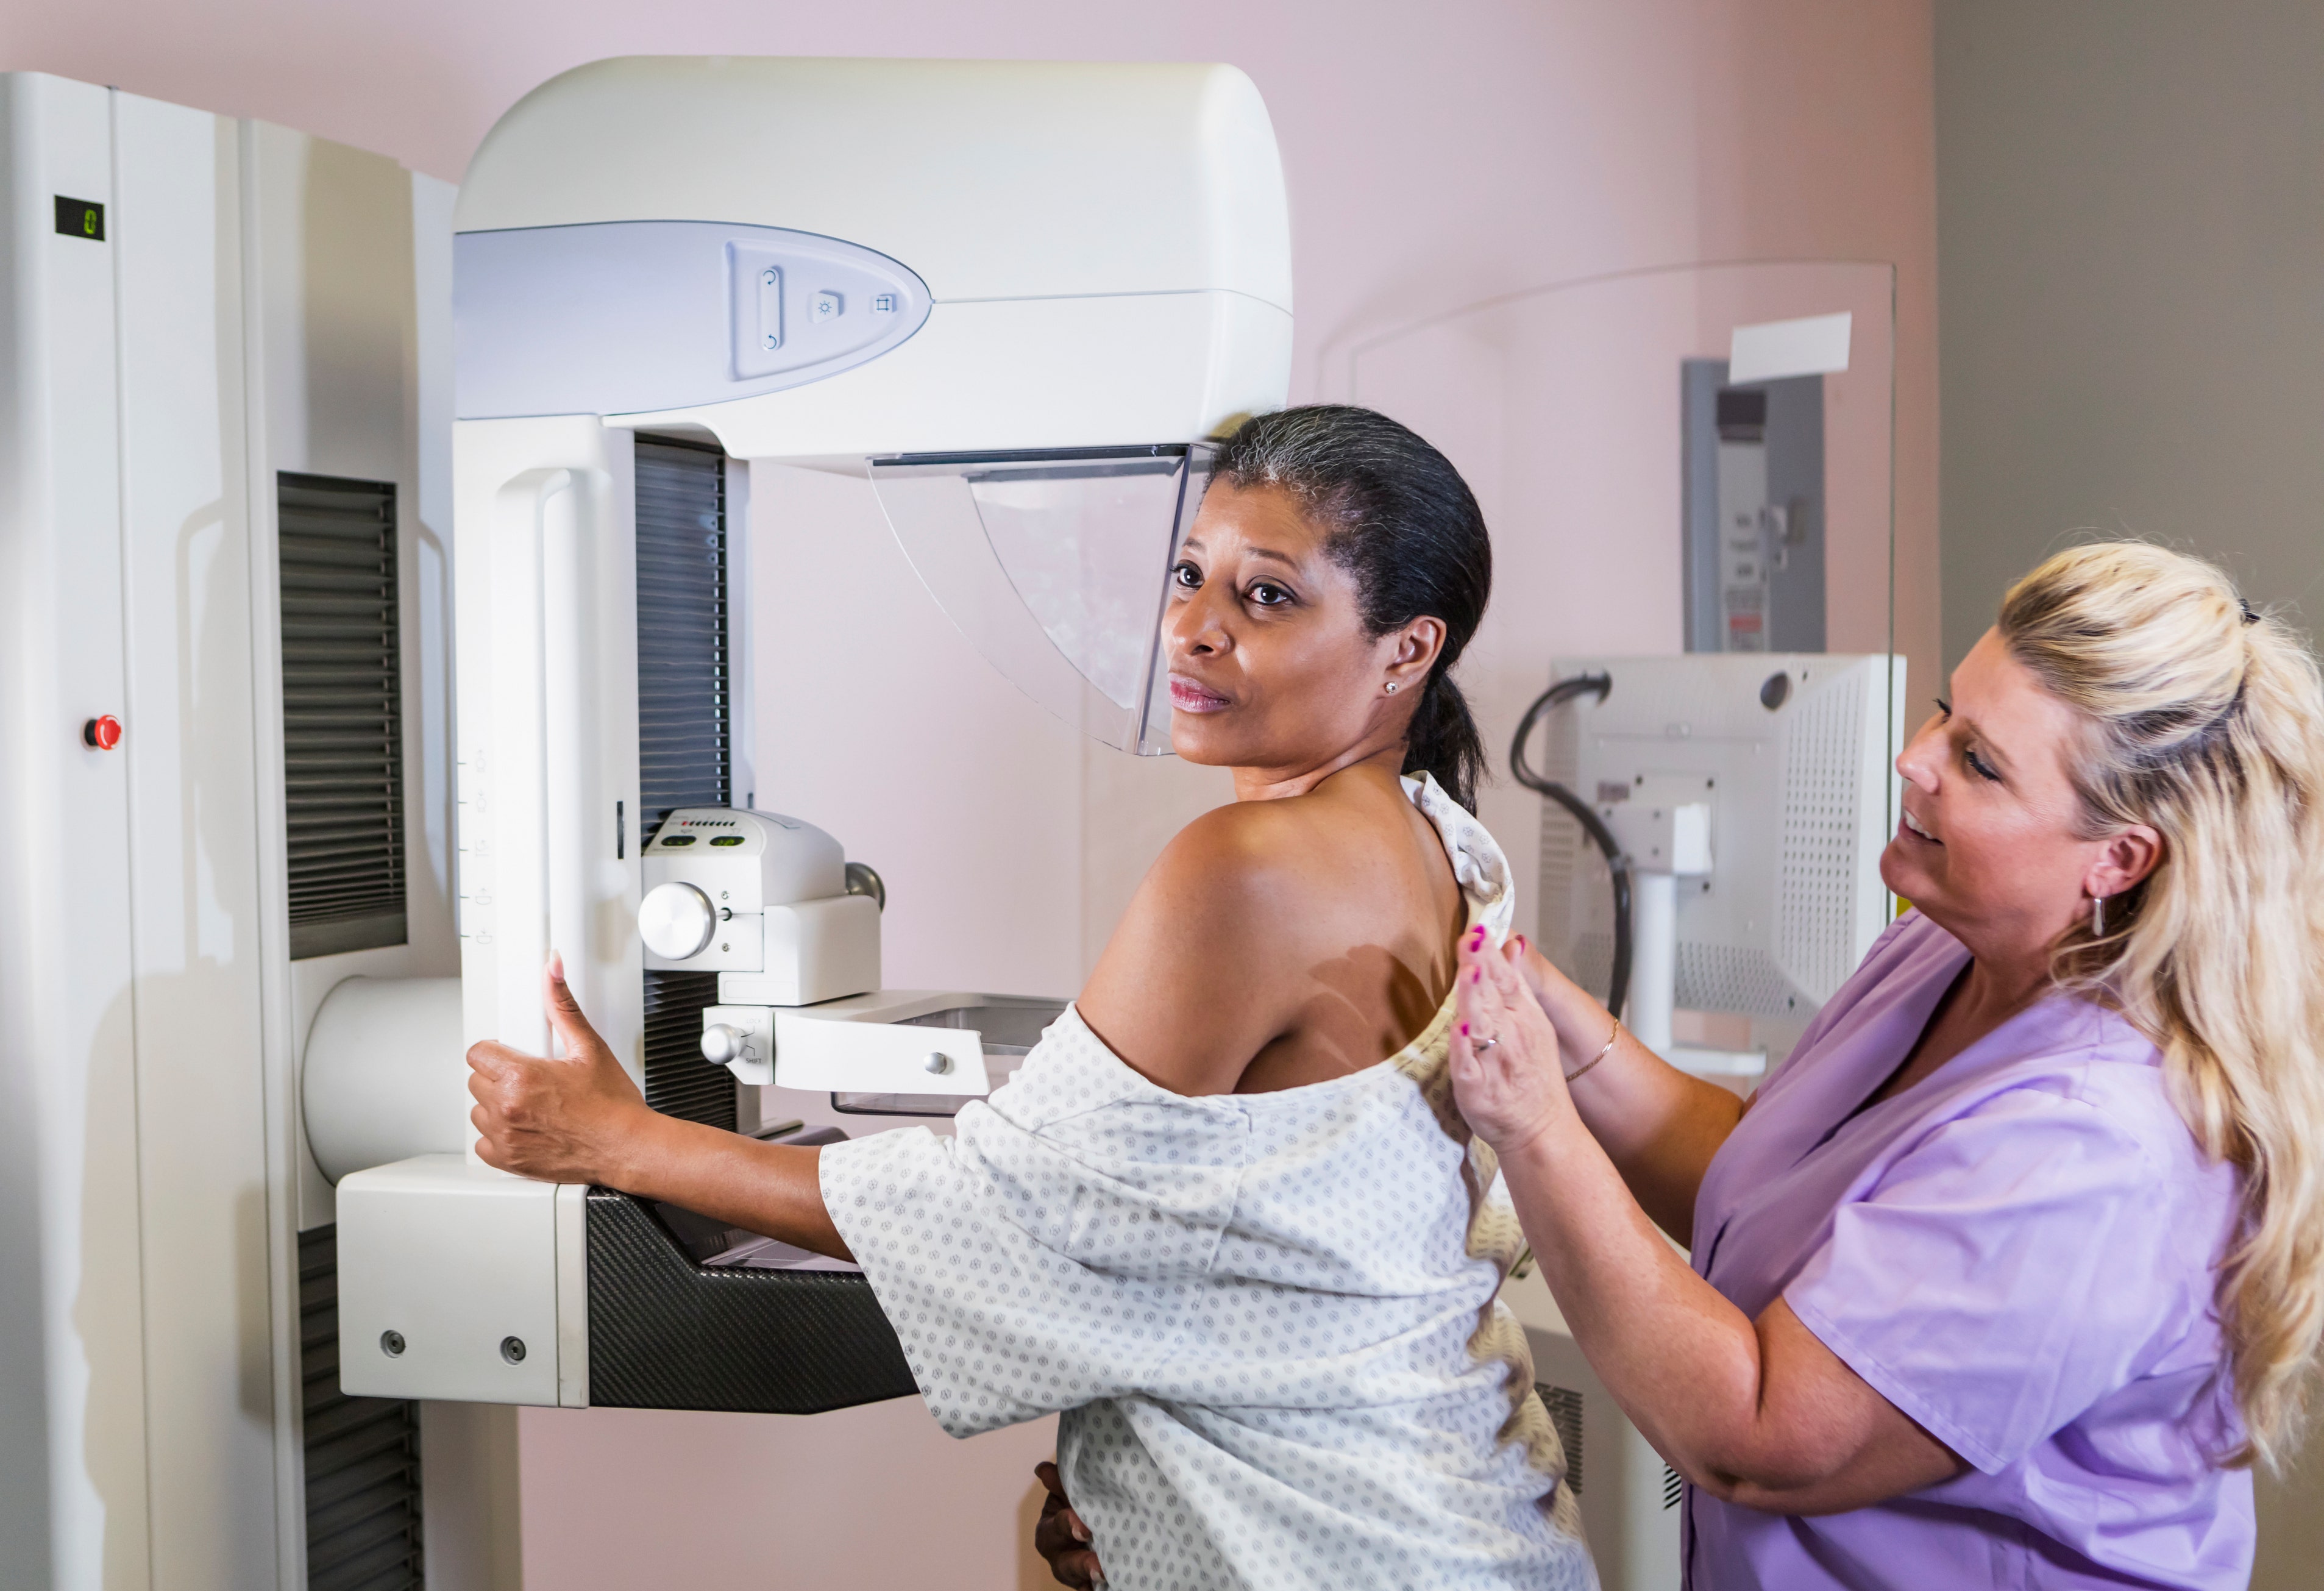 Do not schedule mammography near the COVID-19 vaccine, doctors warn